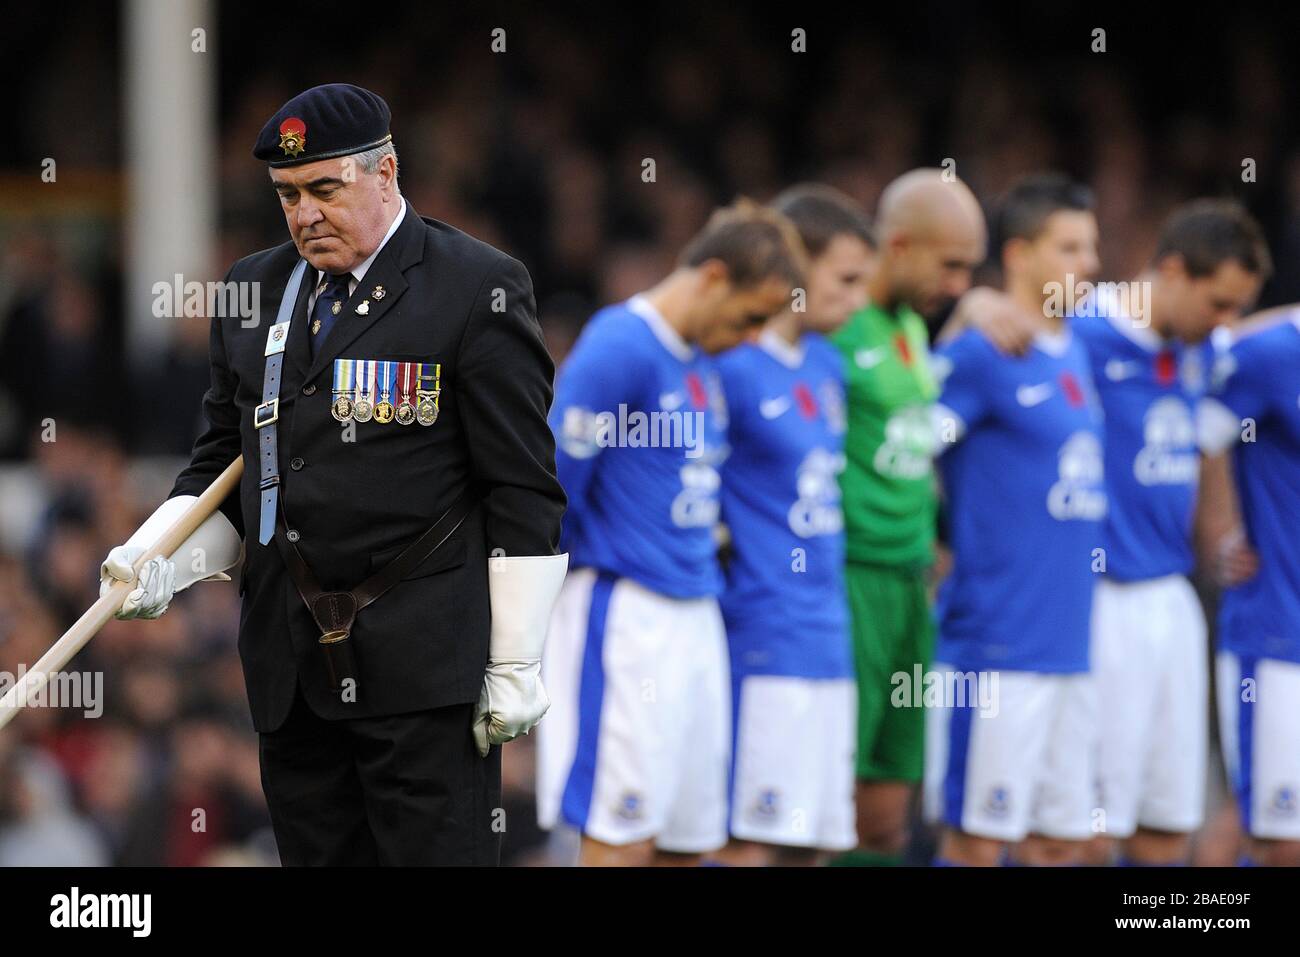 A representative of the armed forces along with the Everton team pay their respects as part of the remembrance weekend, before the game Stock Photo